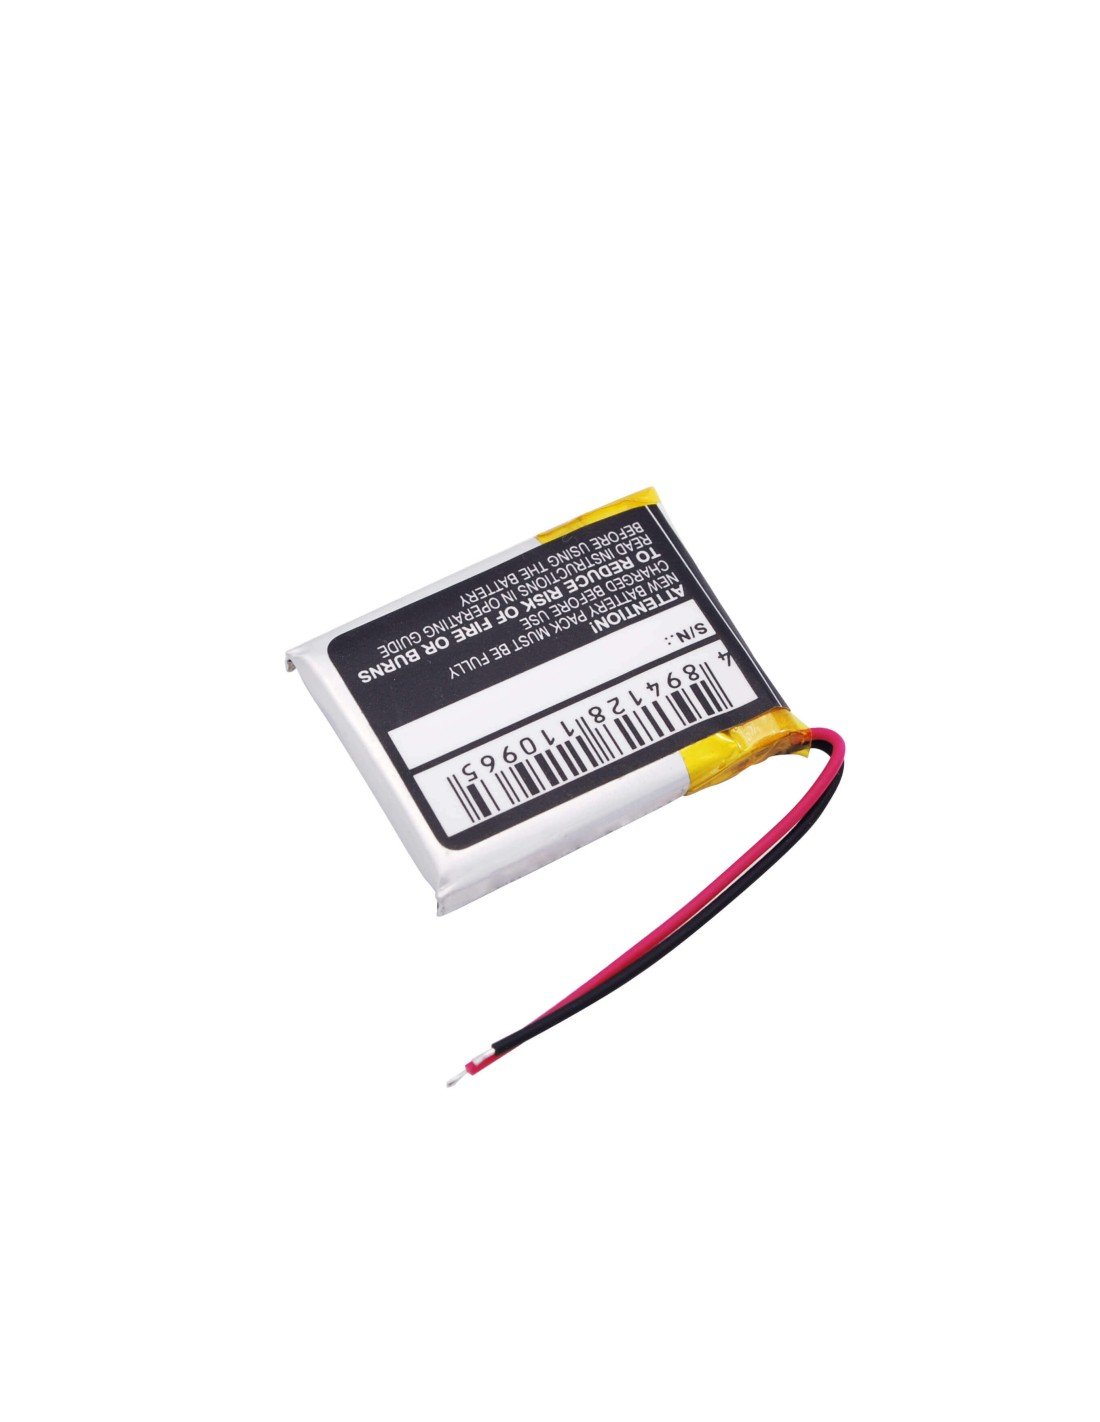 Battery for Voice Caddie Vc200, Vc200 Voice, 3.7V, 270mAh - 1.00Wh